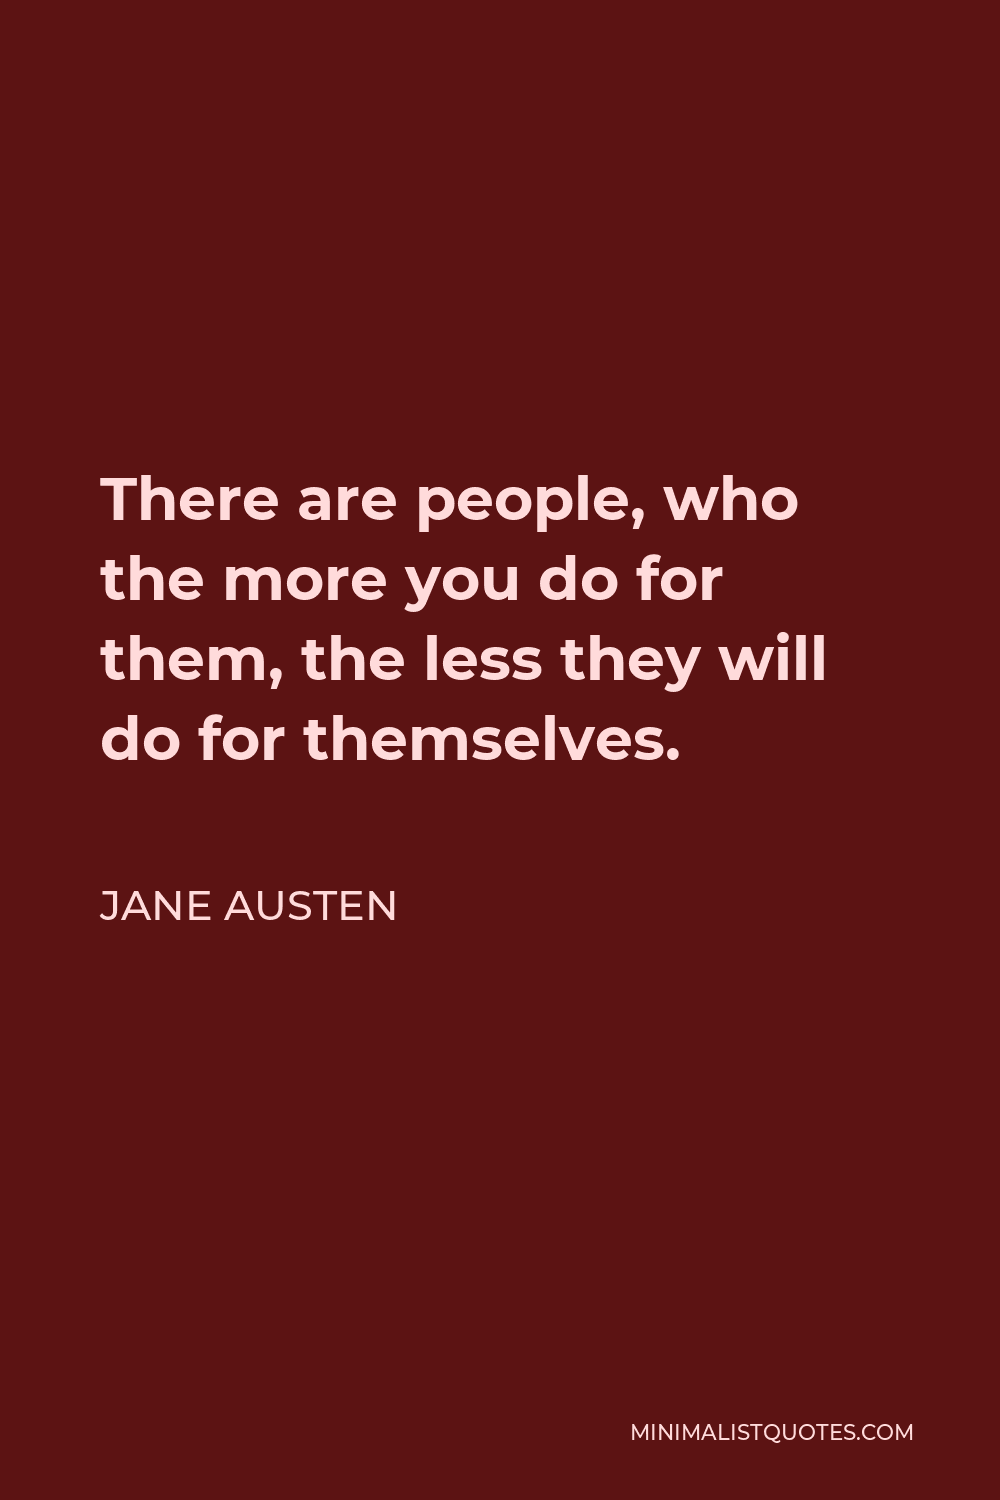 Jane Austen Quote - There are people, who the more you do for them, the less they will do for themselves.